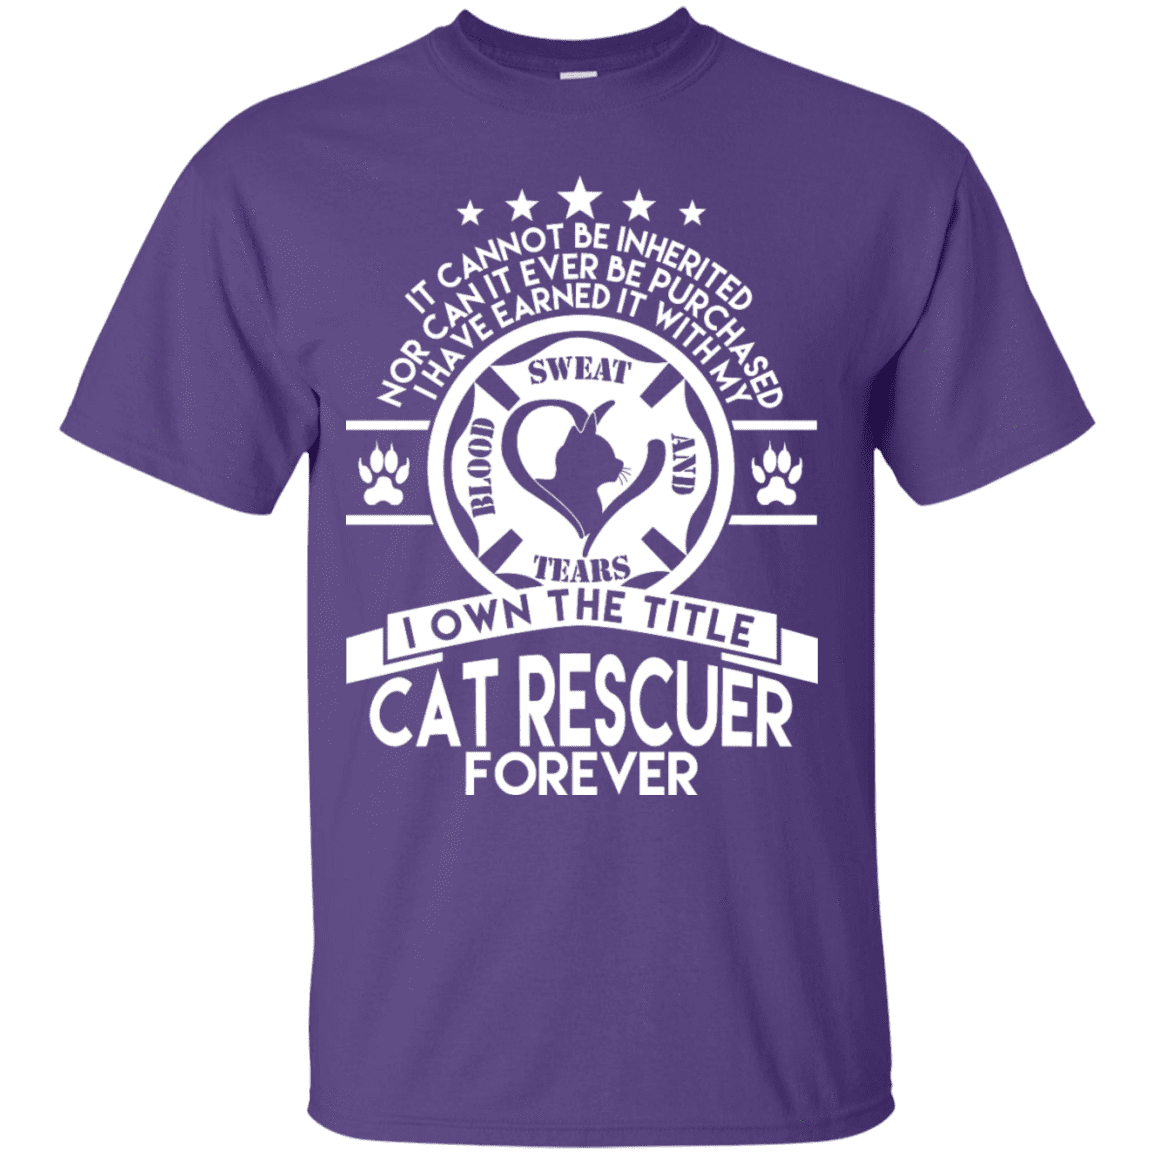 Cat Rescuer Forever - T Shirt.